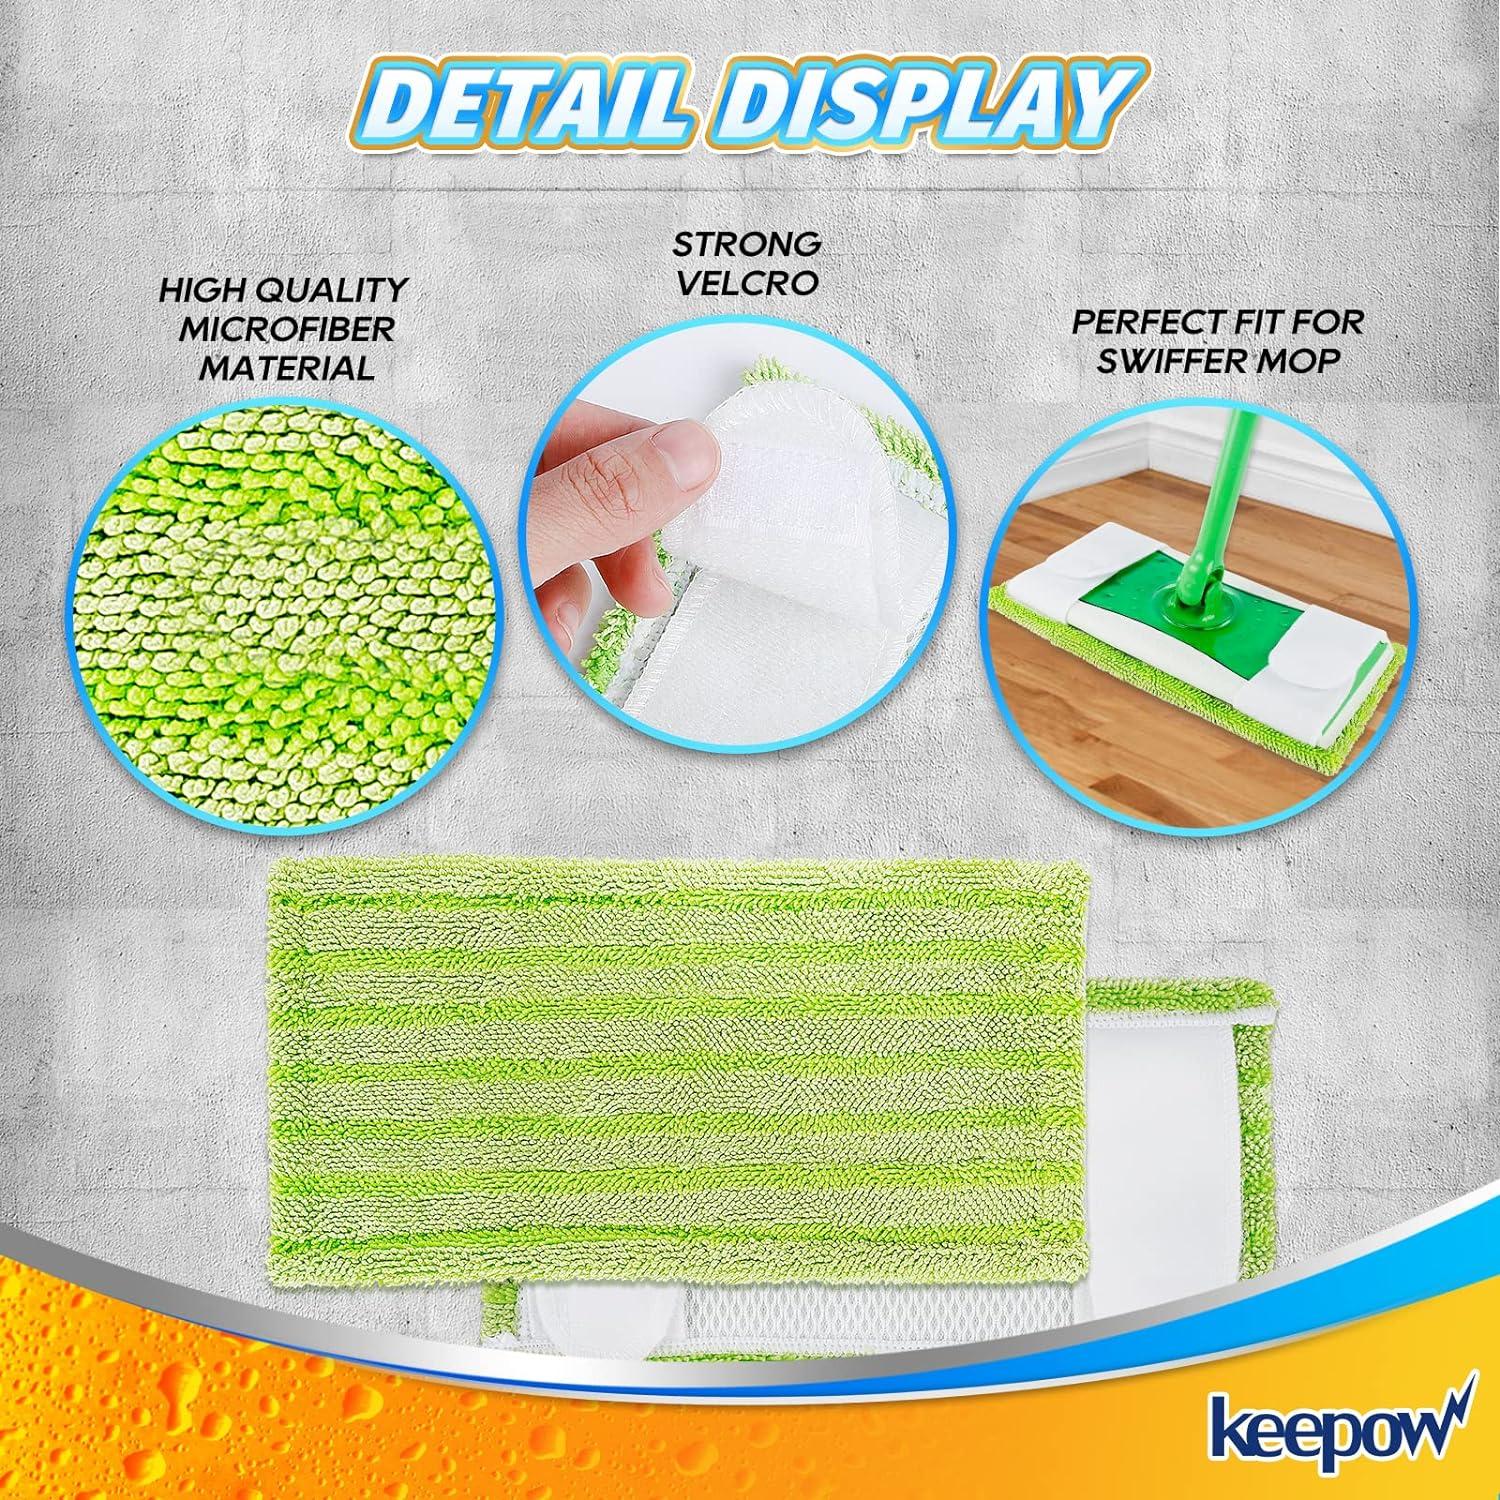  KEEPOW Reusable Wet Pads Compatible with Swiffer Sweeper Mop,  Dry Sweeping Cloths, Washable Microfiber Wet Mopping Cloth Refills for  Surface/Hardwood Floor Cleaning, 8 Pack (Mop is Not Included) : Health 